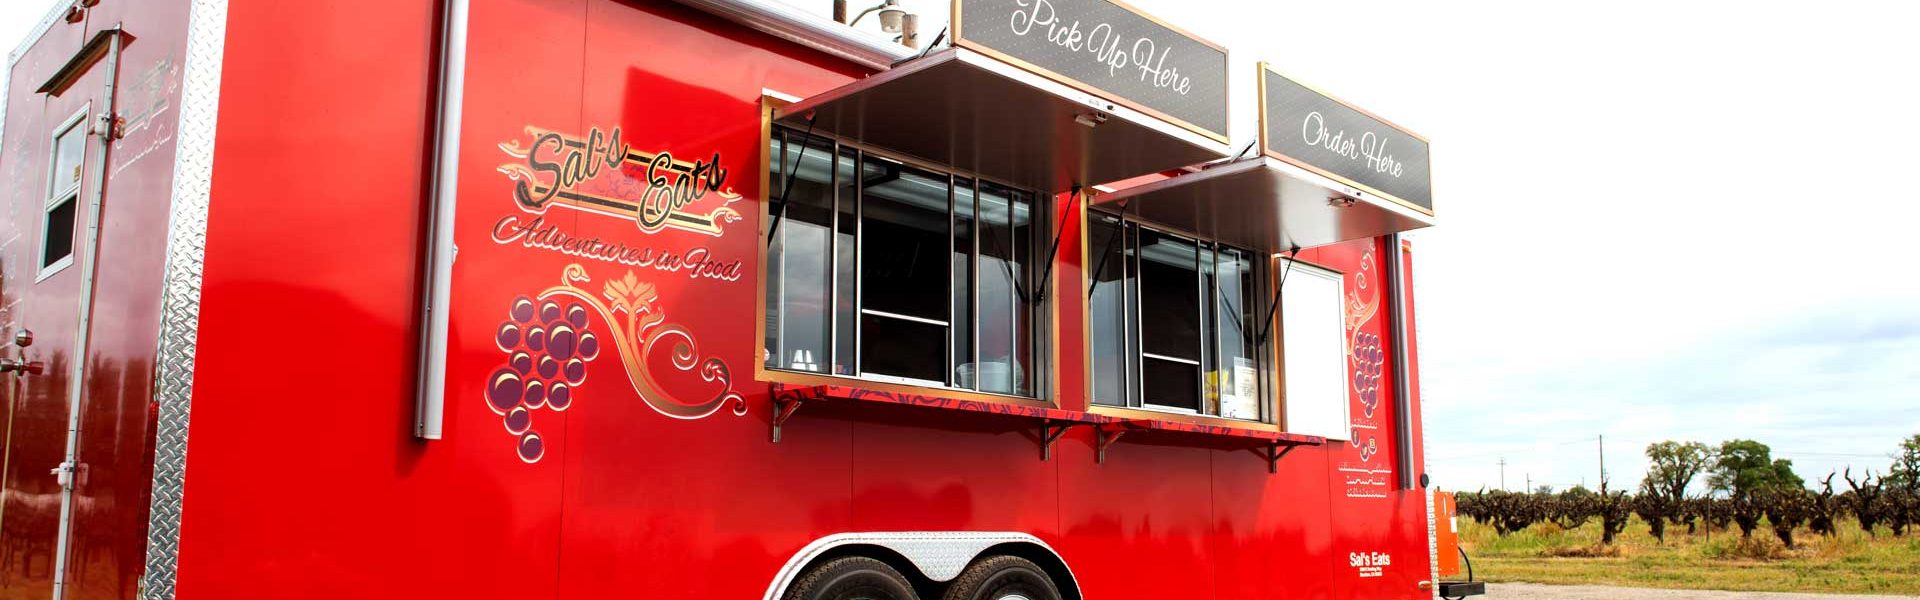 Event Catering Company & Mobile Kitchen in Lodi - Sal's eats food truck catering company